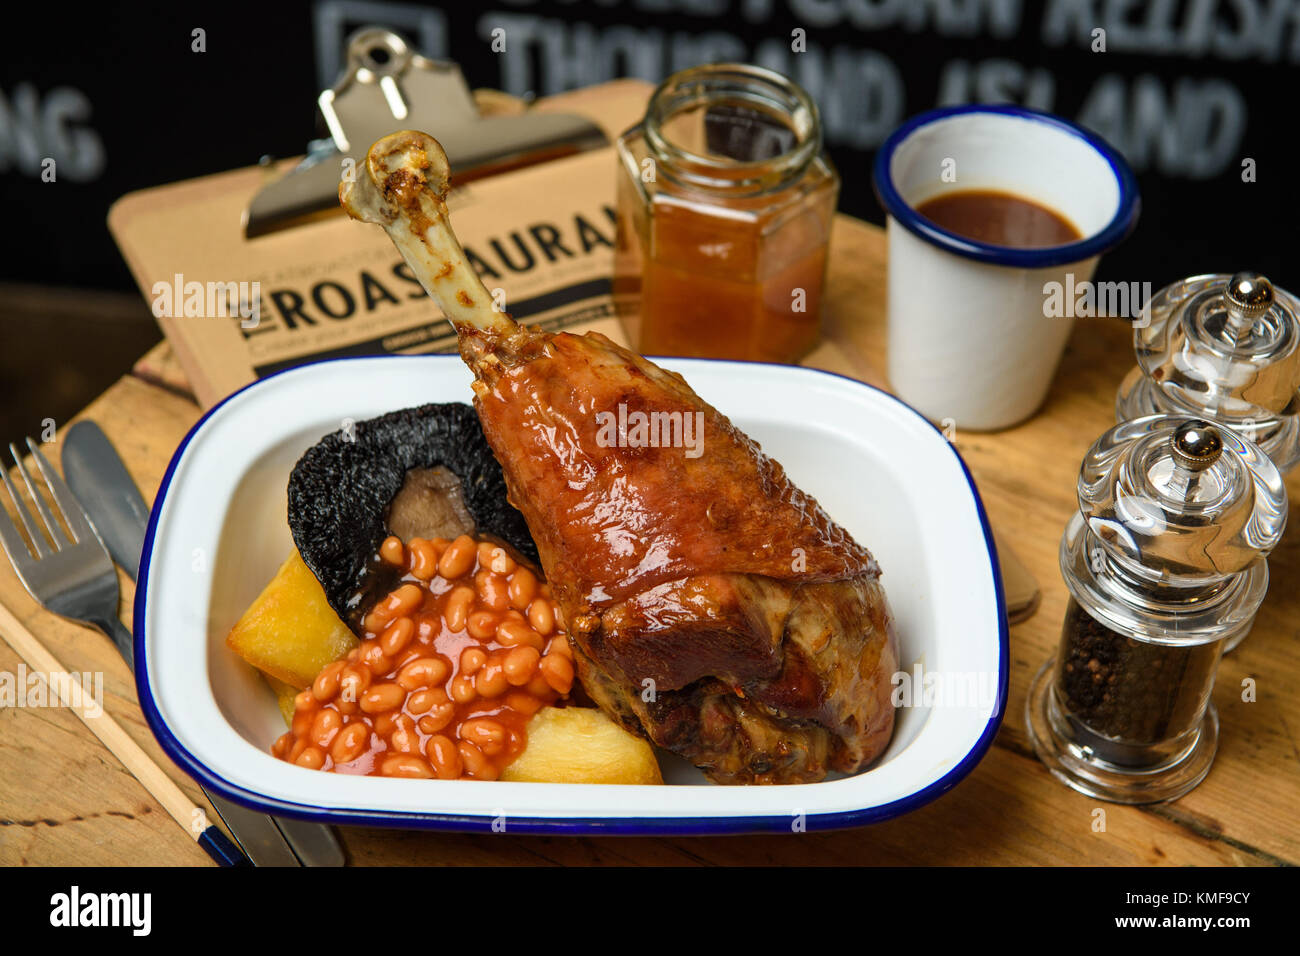 One of over 100,000 varieties of roast dinner, including turkey, mushrooms and baked beans, at the McCain Roastaurant in Shoreditch, east London, Stock Photo